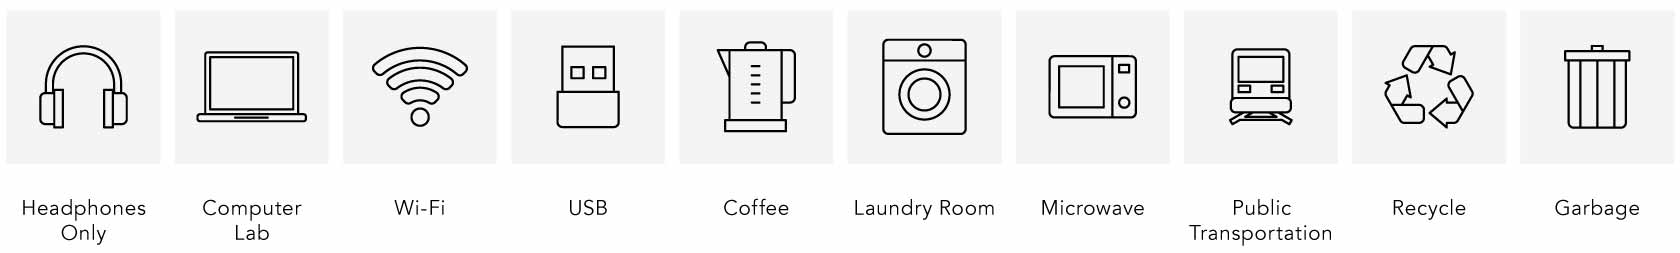 Student housing icons